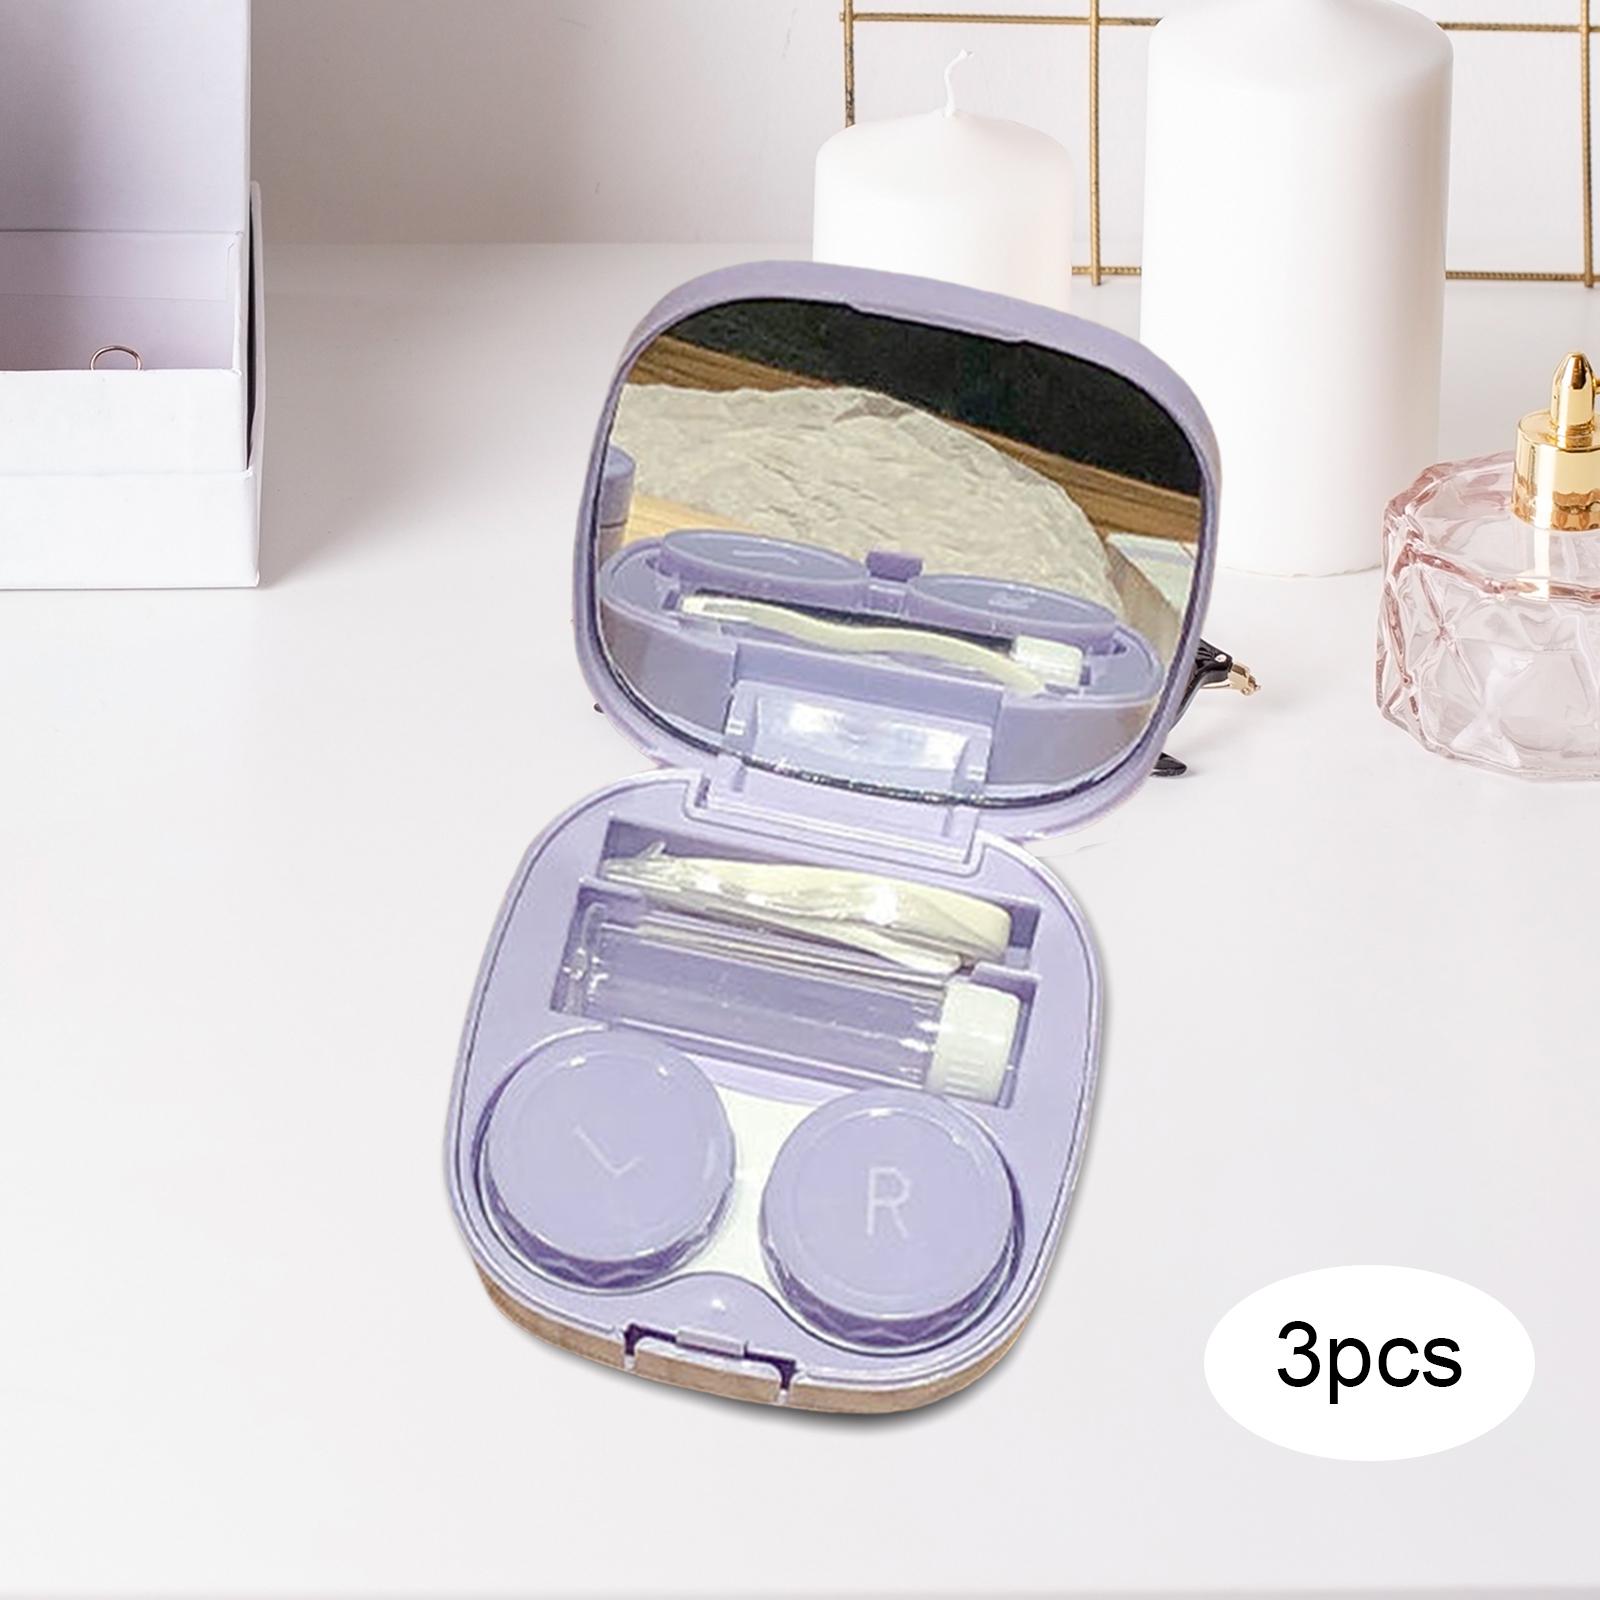 Pack of 3 Compact Contact Lens Case Kit with Mirror Durable Convenient Small Purple